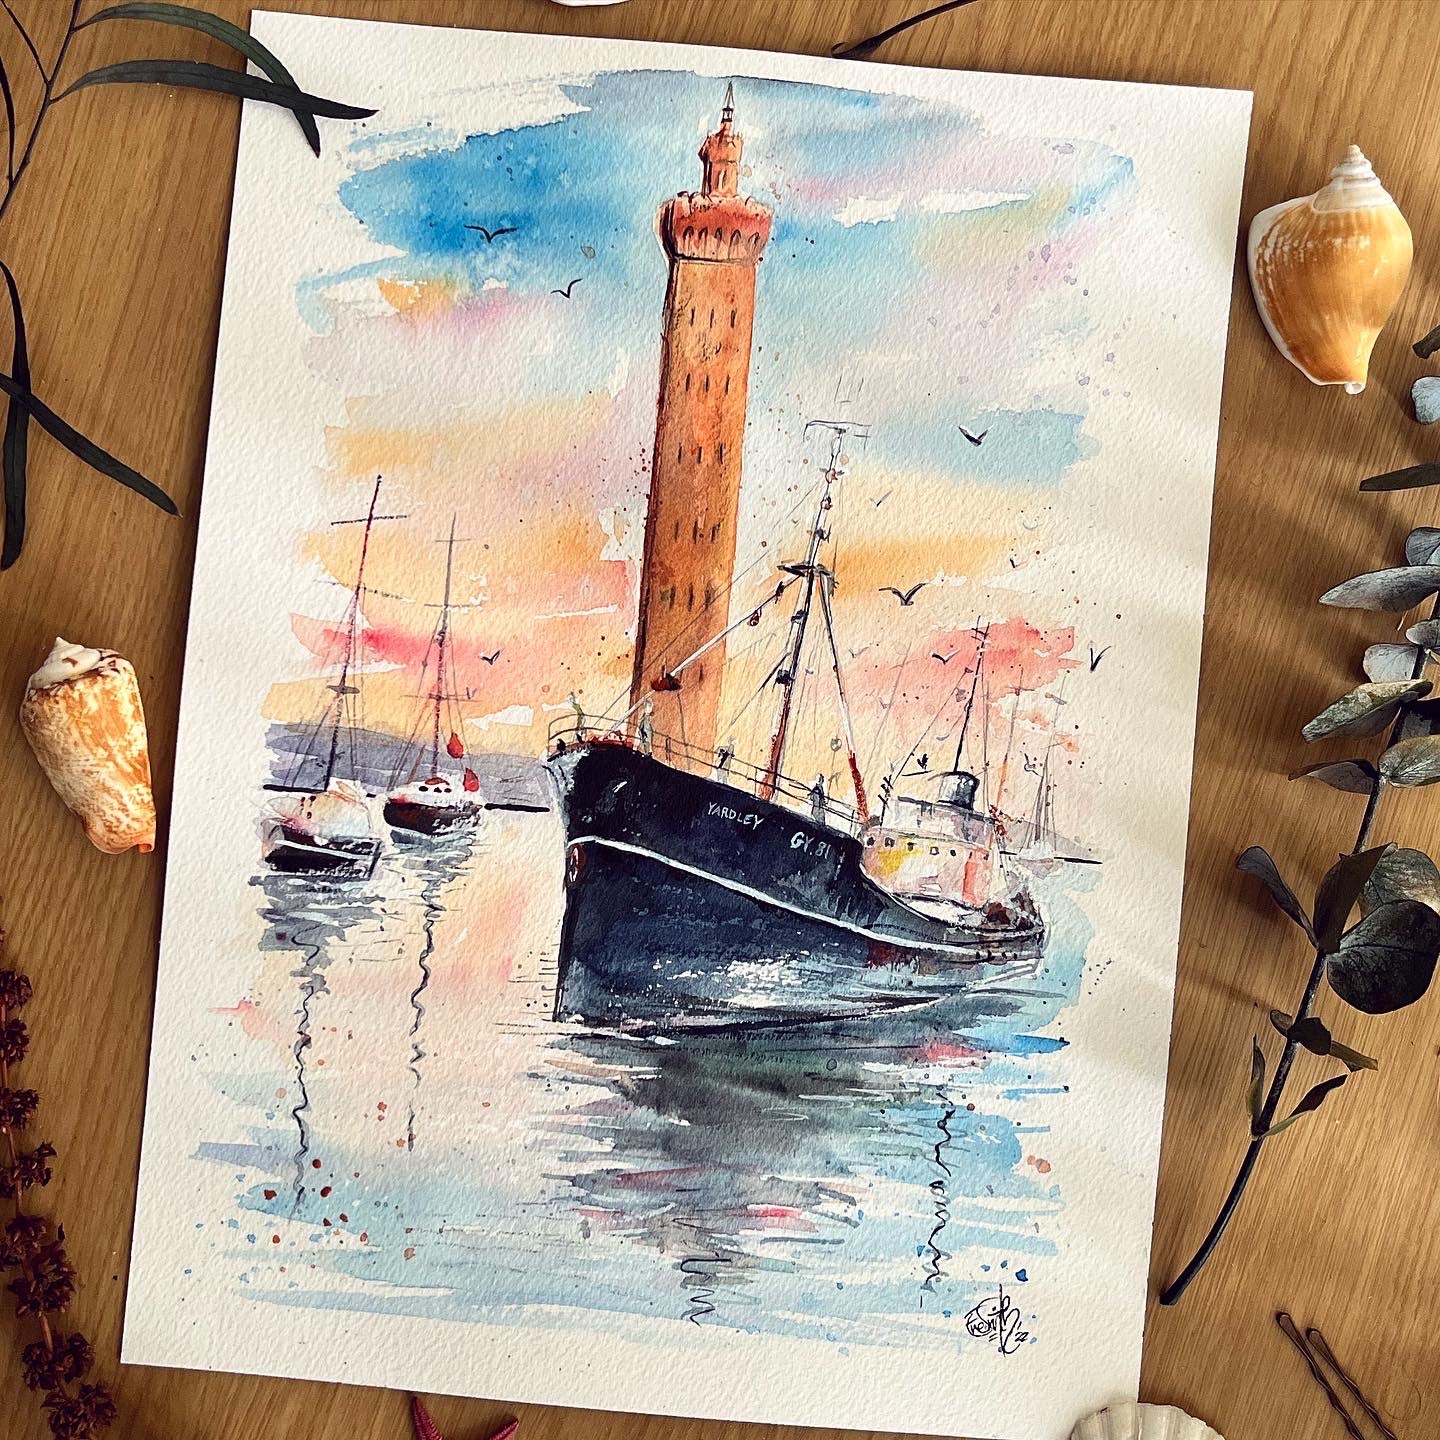 A distinctive original watercolour painting of the Grimsby Dock Tower and trawler coming into landing, painted by Eve Leoni Smith, a local Grimsby artist. 